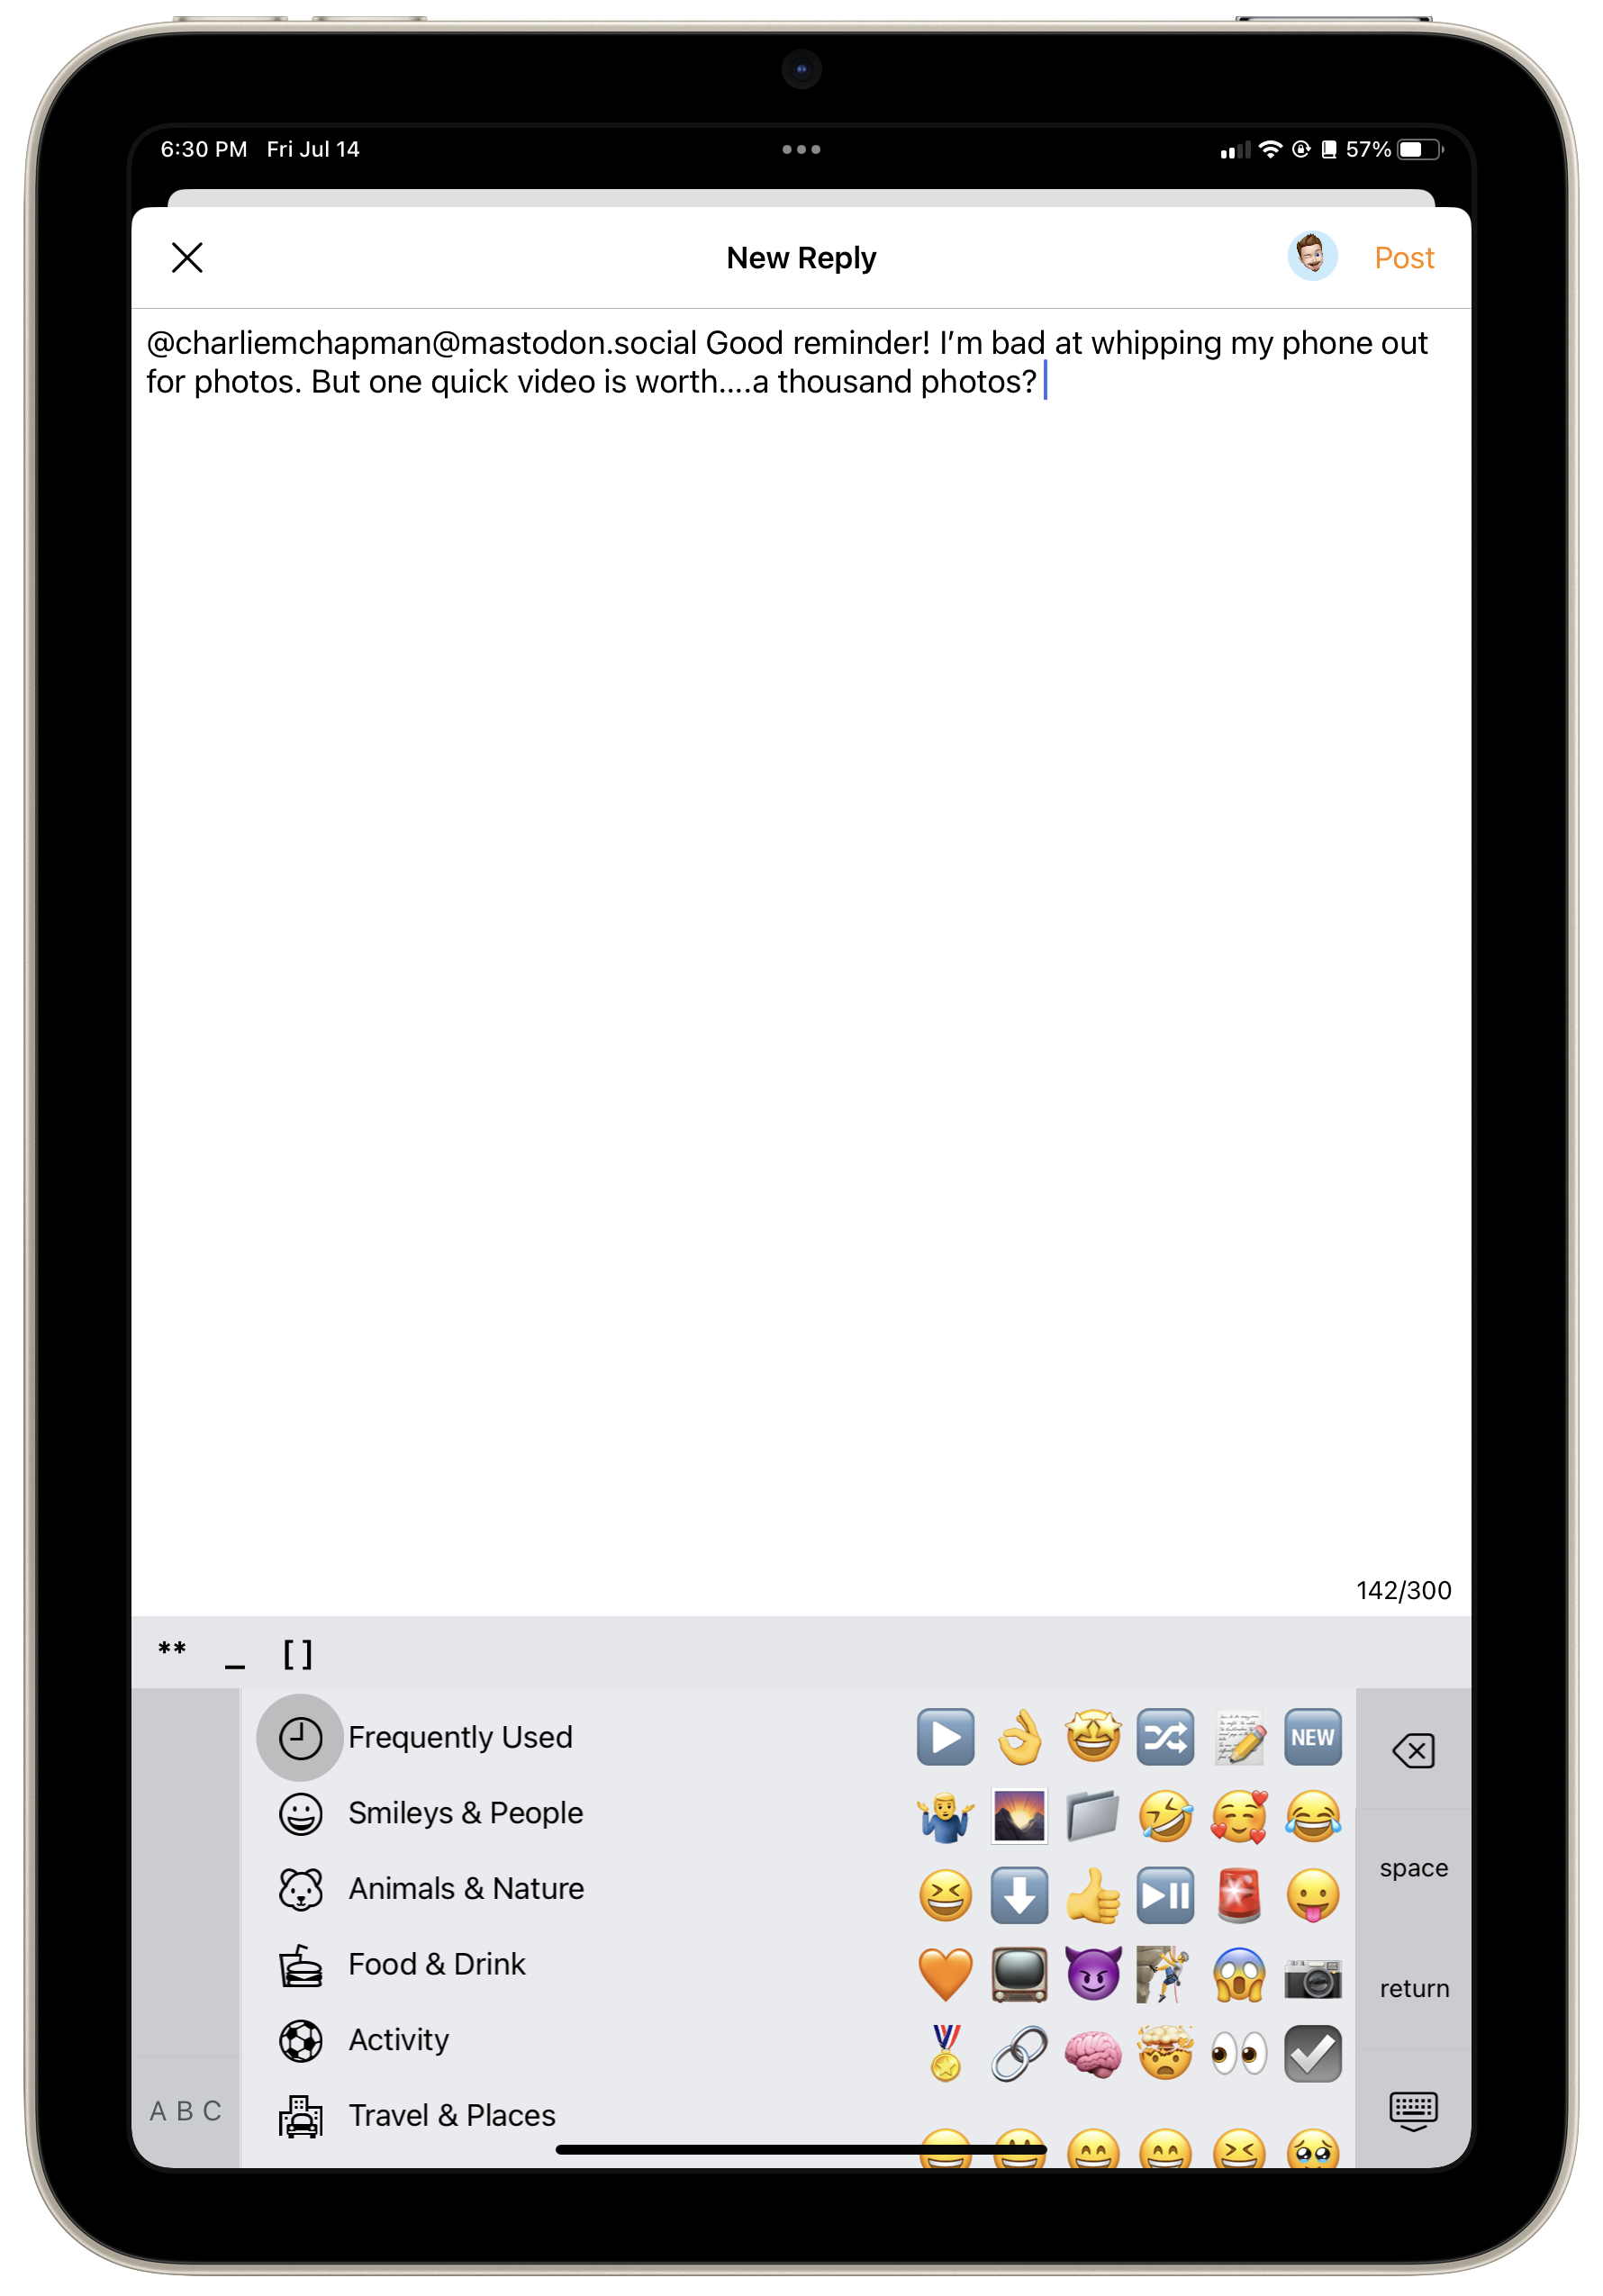 iPad text composition screen with split view keyboard in portrait orientation, with emoji categories on the left and vertically scrolling emoji list on the right.